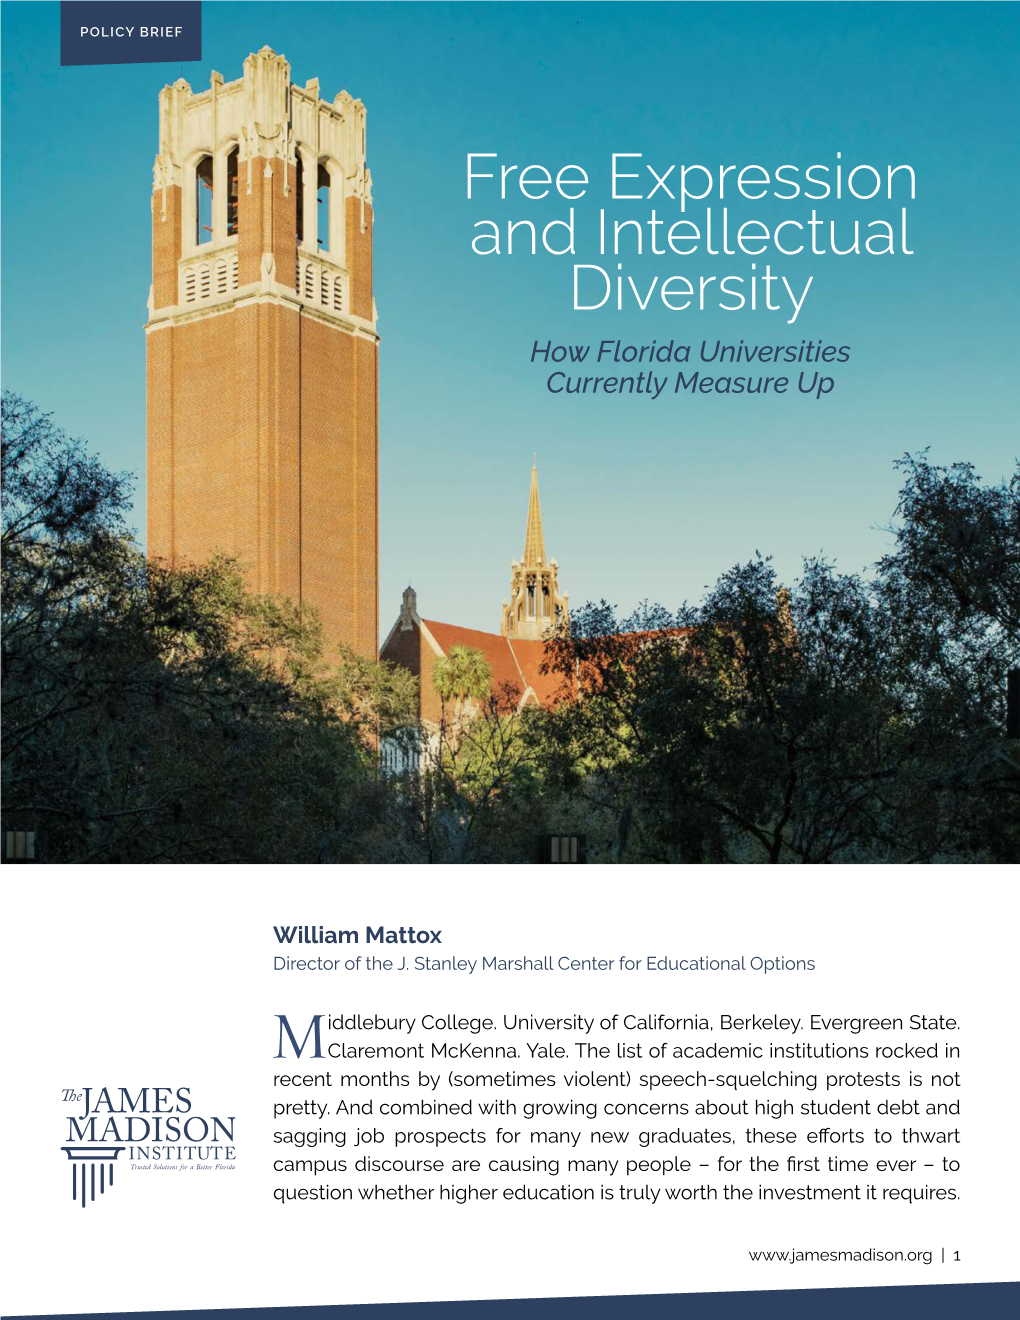 Free Expression and Intellectual Diversity How Florida Universities Currently Measure Up